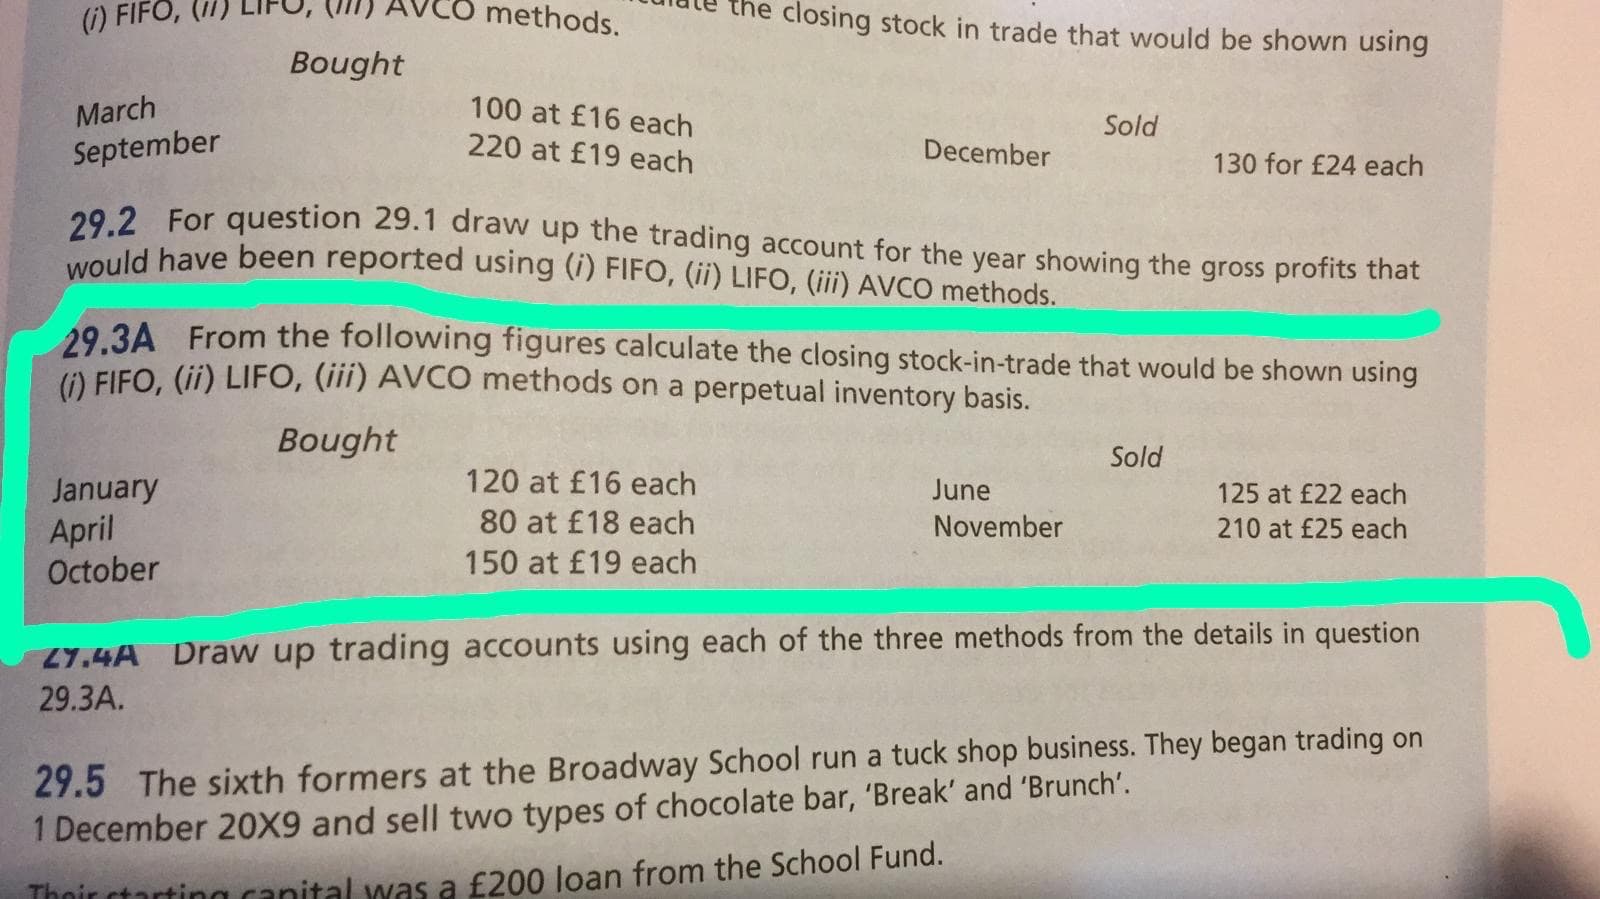 (i) FIFO,
methods.
the closing stock in trade that would be shown using
Bought
March
100 at £16 each
Sold
September
220 at £19 each
December
130 for £24 each
29. 2 For question 29.1 draw up the trading account for the year showing the gross profits that
would have been reported using (i) FIFO, (ii) LIFO, (iii) AVCO methods.
29.3A From the following figures calculate the closing stock-in-trade that would be shown using
() FIFO, (ii) LIFO, (iii) AVCO methods on a perpetual inventory basis.
Bought
Sold
120 at £16 each
January
April
October
June
125 at £22 each
80 at £18 each
November
210 at £25 each
150 at £19 each
27.4A Draw up trading accounts using each of the three methods from the details in question
29.3A.
tuck shop business. They began trading on
29.5 The sixth formers at the Broadway School run
1 December 20X9 and sell two types of chocolate bar, 'Break' and 'Brunch'.
Thoir ctarting canital was a £200 loan from the School Fund.
